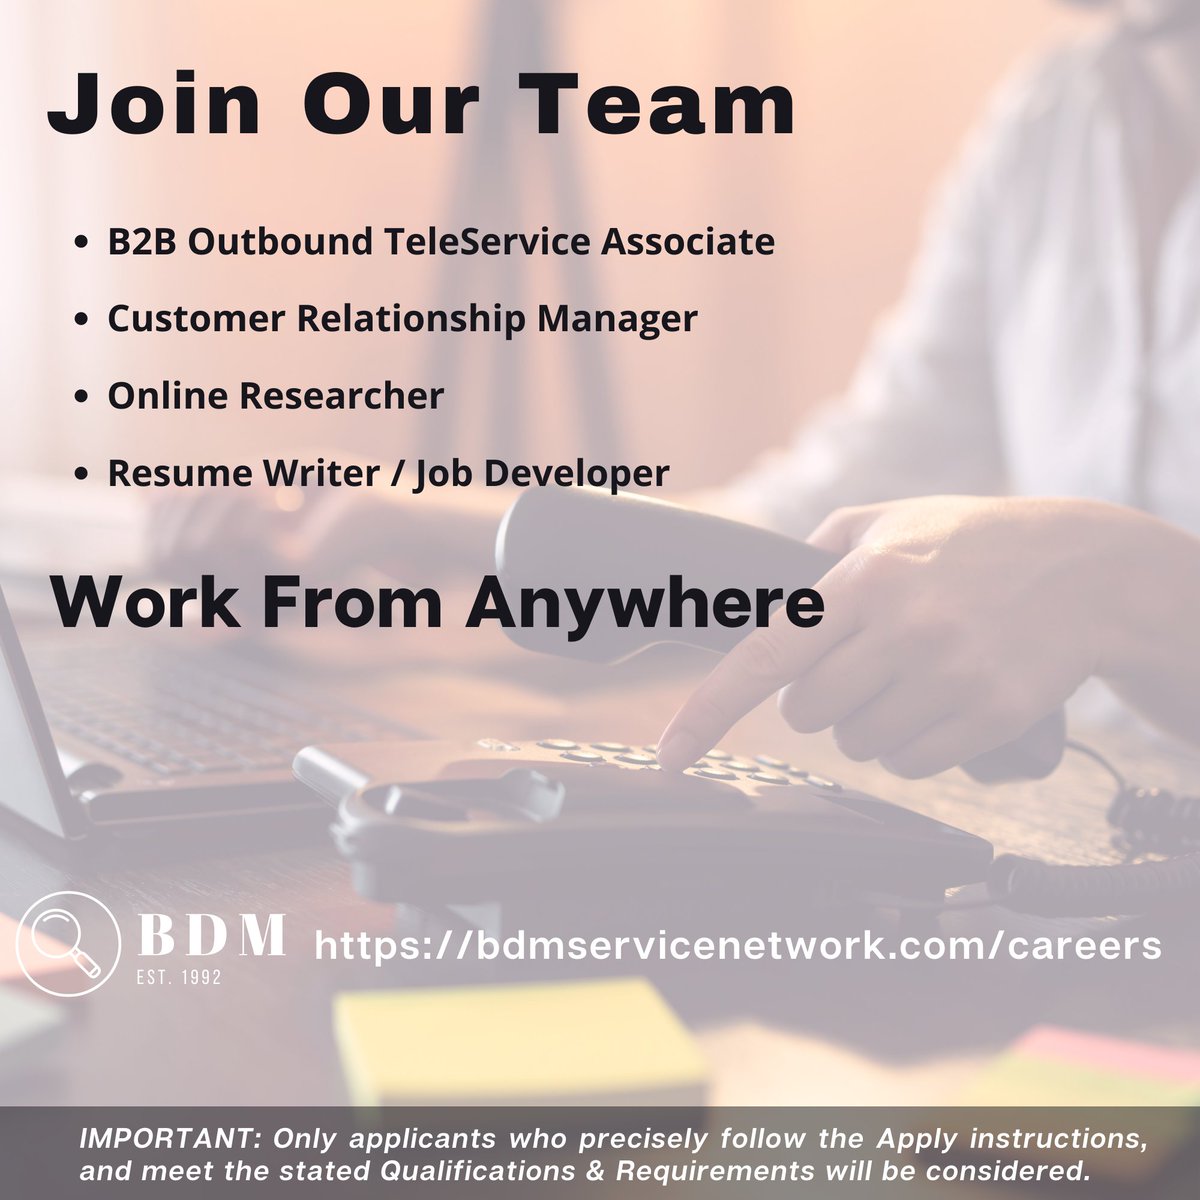 Join Our Team! Work From Anywhere. Check out our Permanent #RemoteJobs at ow.ly/WYJq50M6sih

#internationaljobs #jobdeveloper #customerrelationshipmanager #onlineresearcher #telemarketer #telemarketing #virtualjobs #workathome #workfromhome #remotejob #remotejobs #hiring